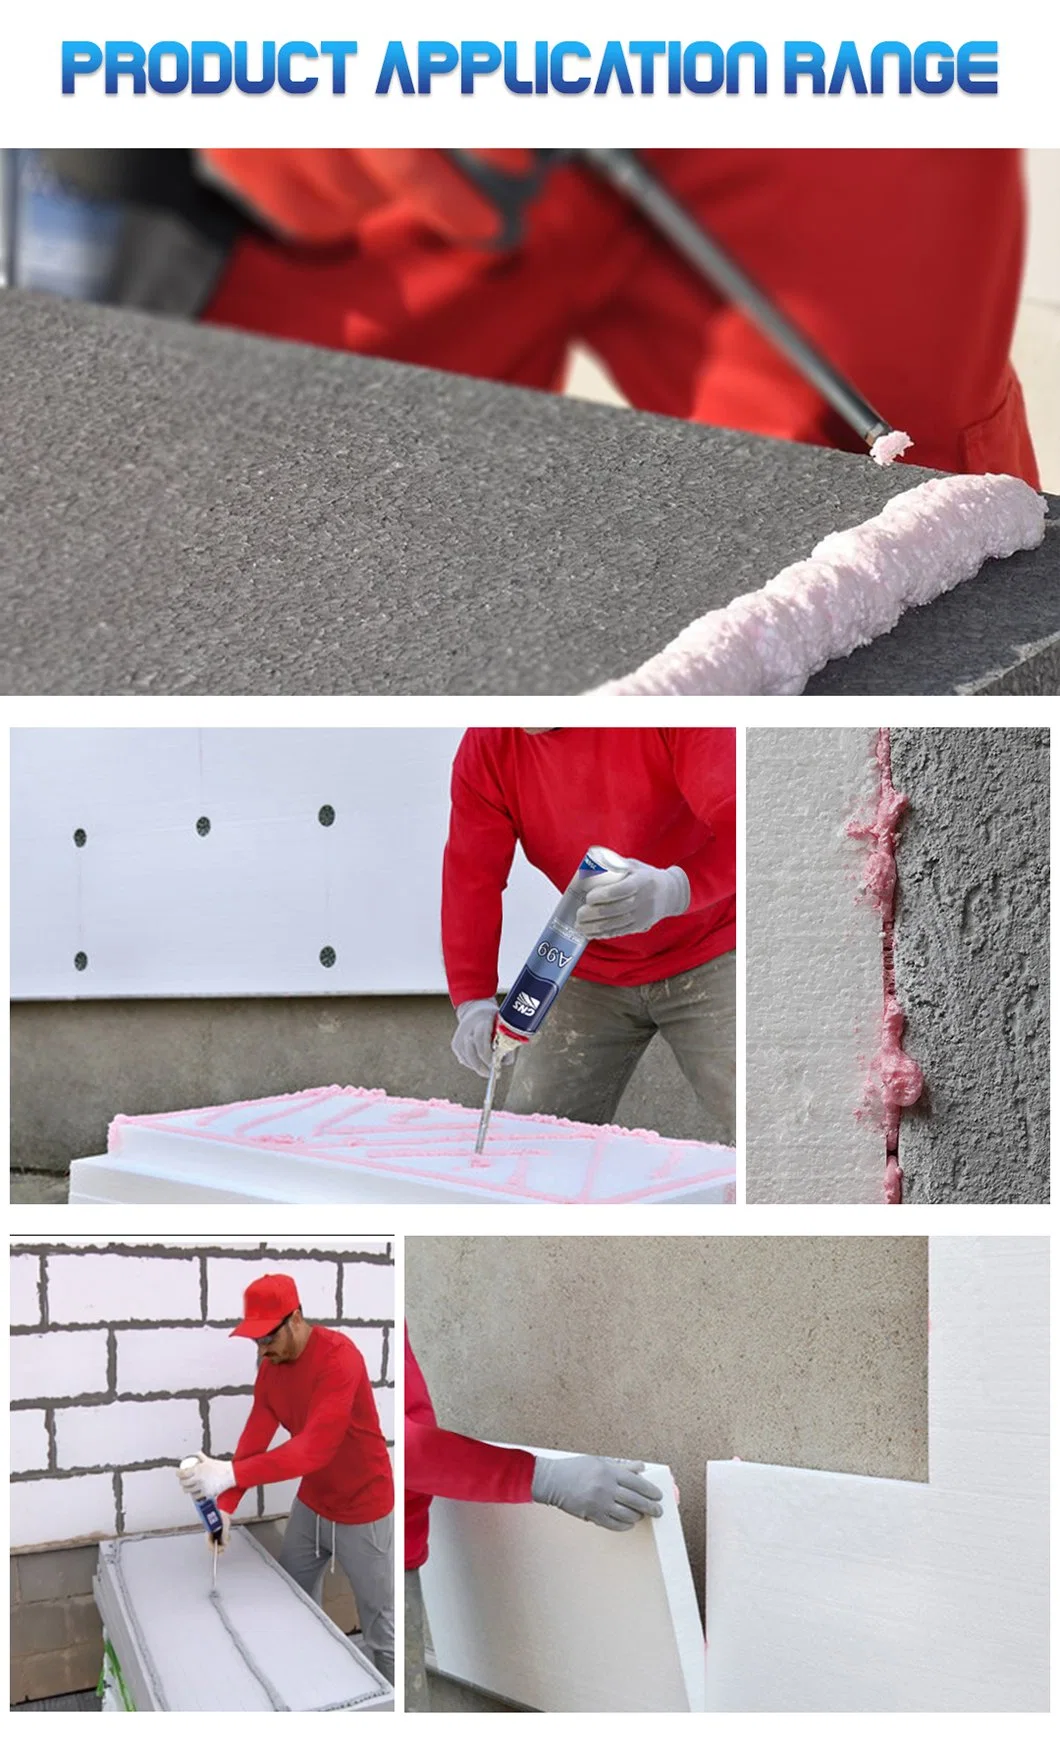 Quick and Strong Adhesive Waterproof Spray PU Foam